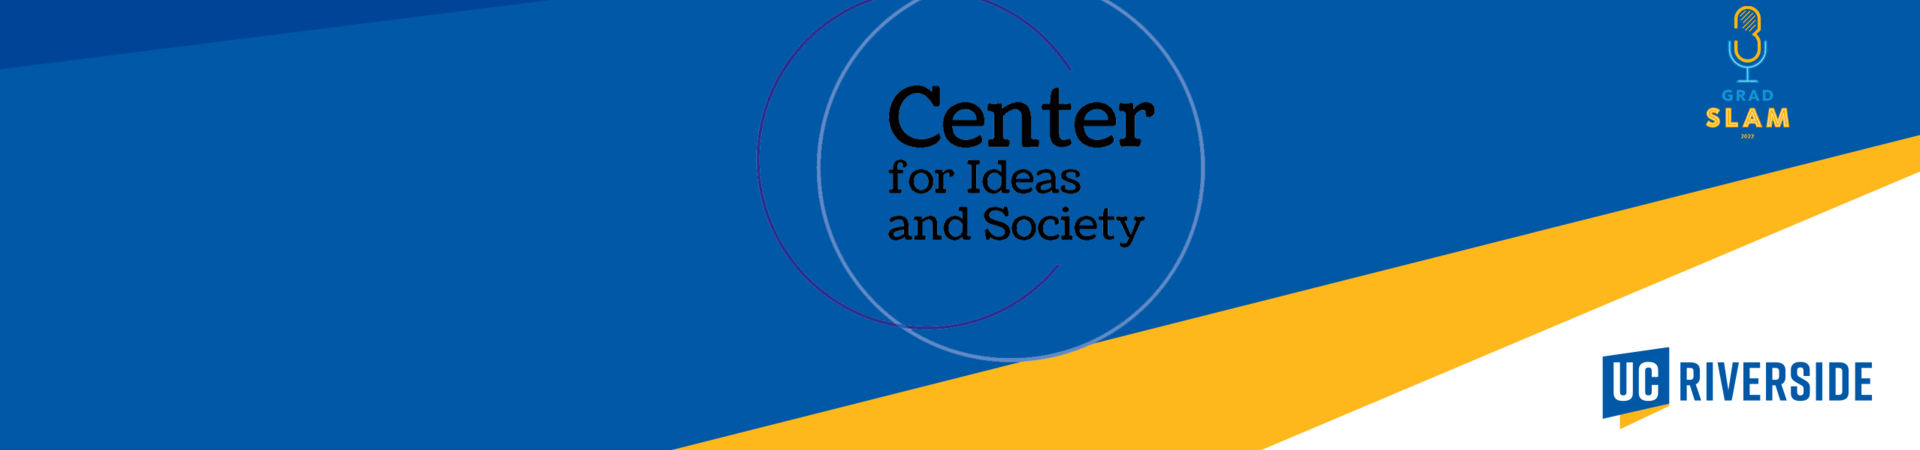 Center for Ideas and Society